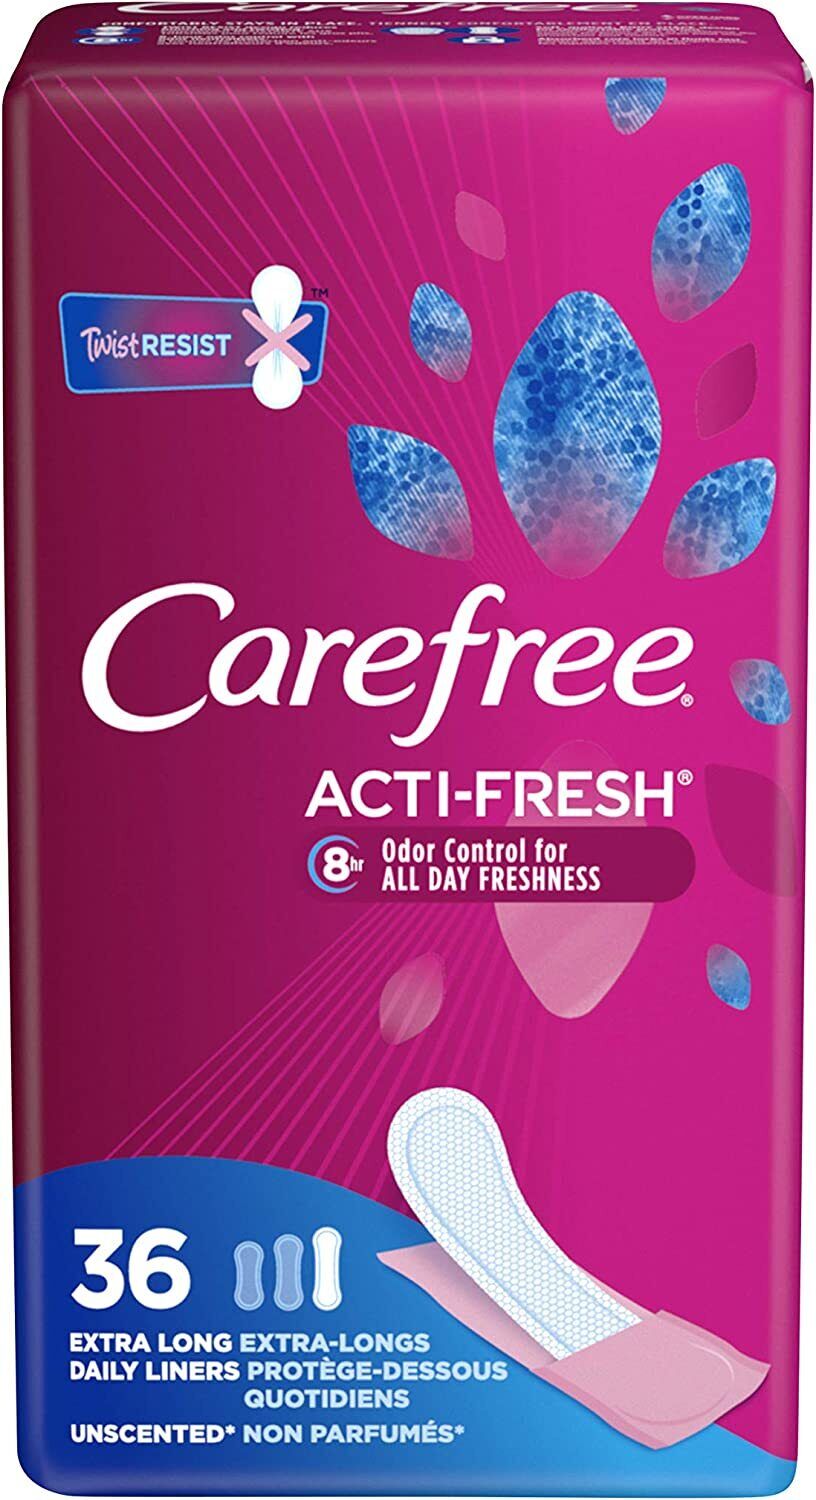 Carefree Acti-fresh Extra Long Unscented Daily Liners - 36 Count